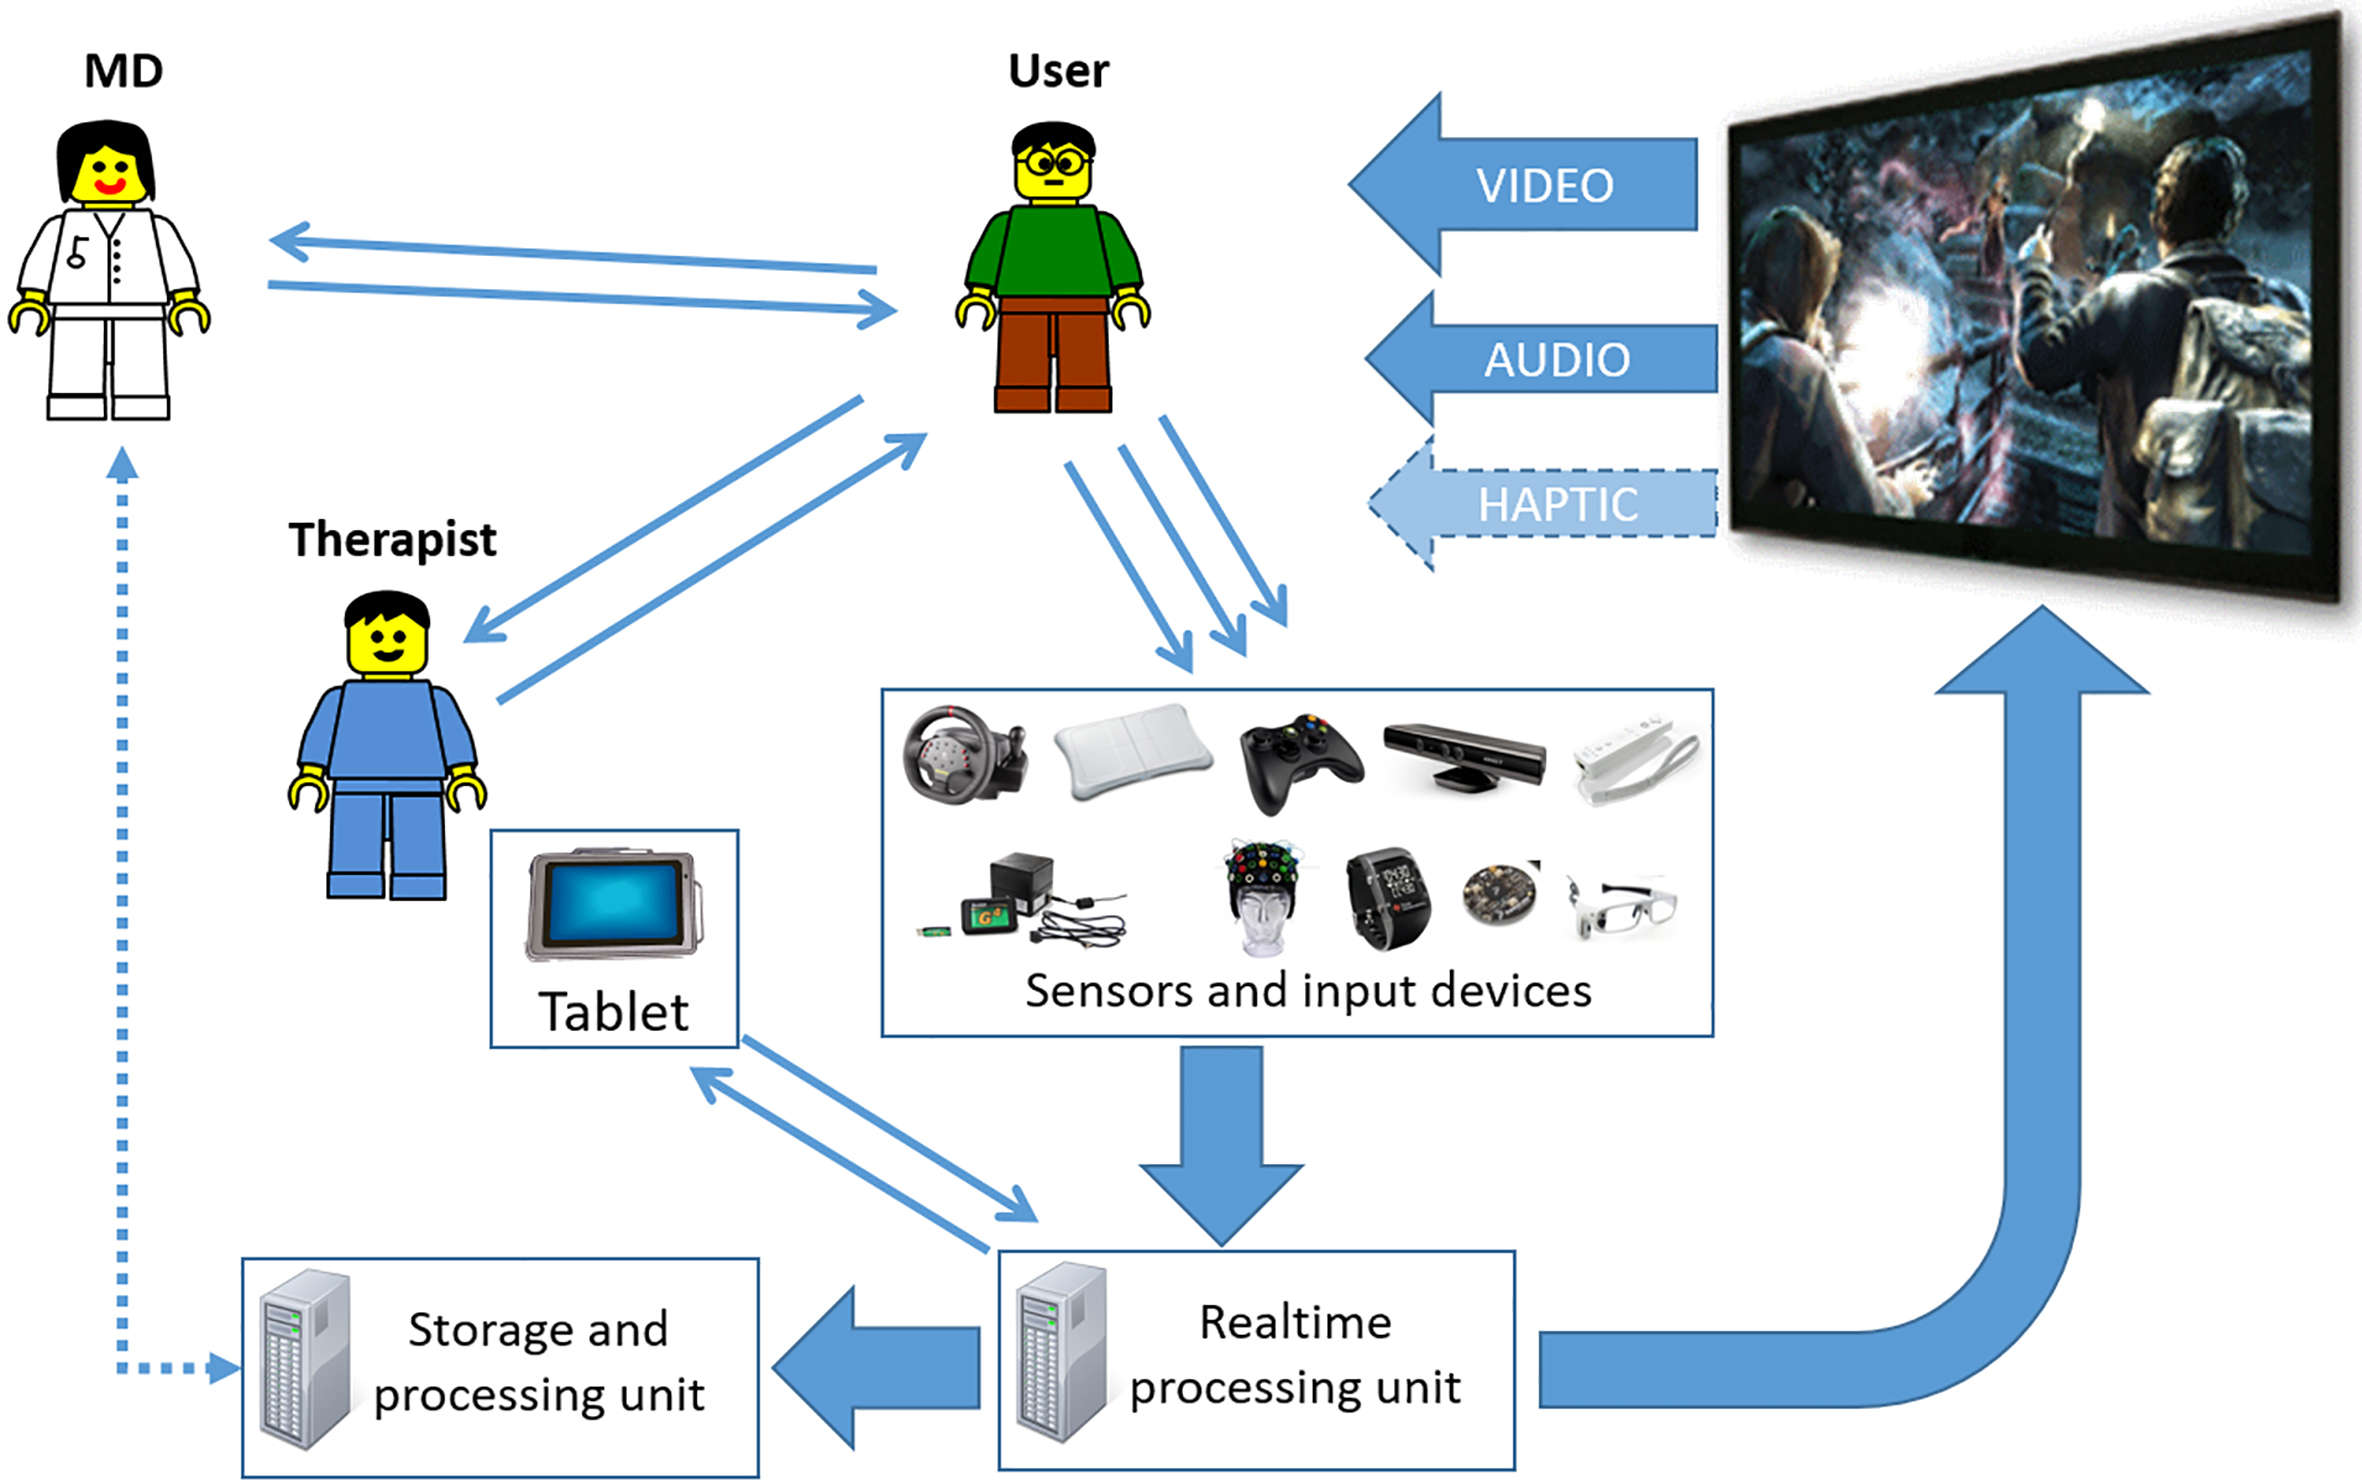 An overview of VITAMIN software: the child’s movements, acquired by a number of sensing devices (i.e. videogame handles, Kinect, more sophisticated devices, etc.) is translated into digital information. This information is then used for two purposes: it is processed within the game activity to calculate the audio/video (and haptic in the future) biofeedback to be presented to the user, while it is processed and stored for further off-line analysis. The therapist can adapt the activities in real-time through a tablet, while the clinician can supervise off-line the entire rehabilitation process by observing the data collected in the sessions.